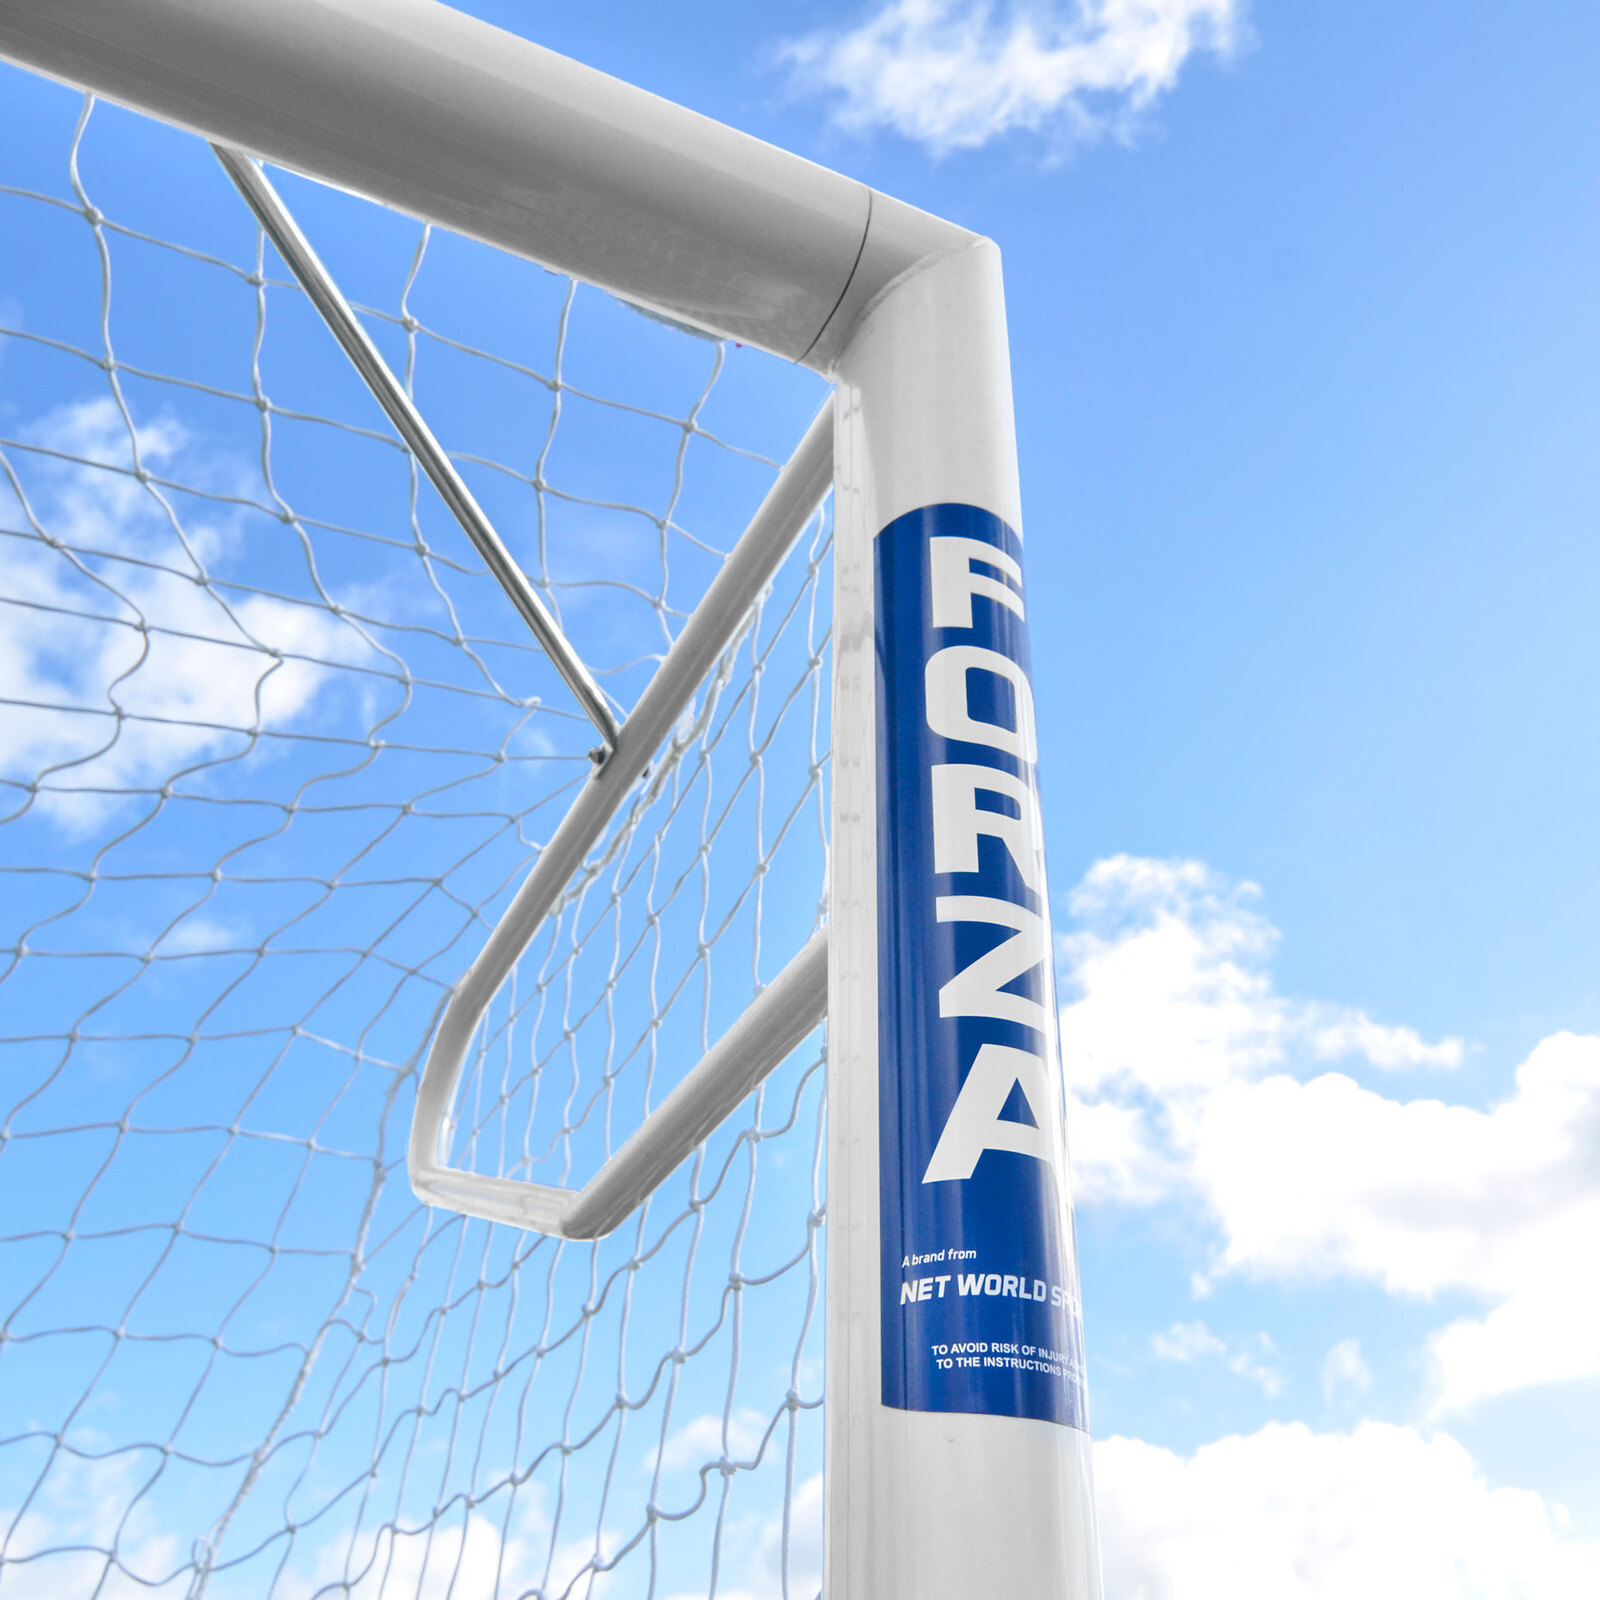 6.4M X 2.1M FORZA ALU110 SOCKETED SOCCER GOAL [Single or Pair:: Single]